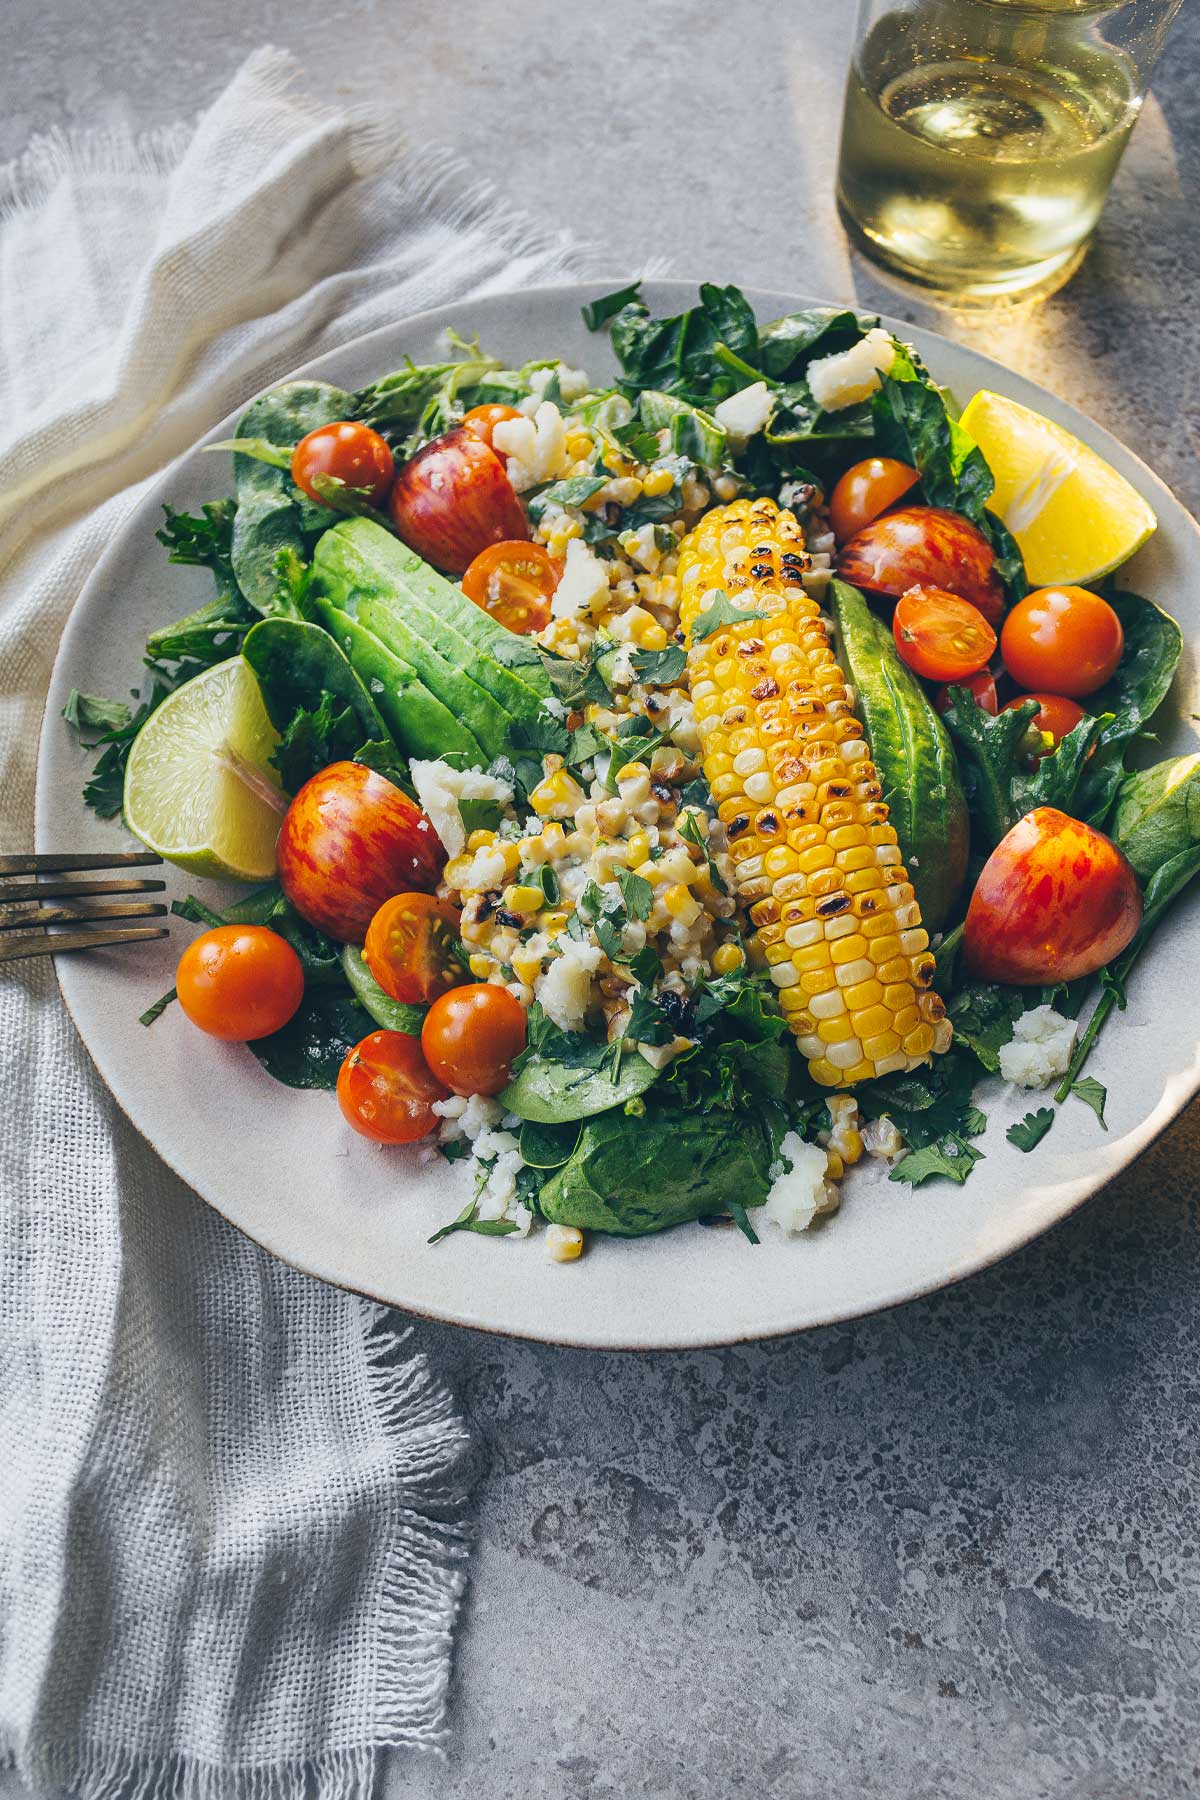 A large plate with a large salad brimming with fresh greens, avocado, grilled corn salad, tomatoes, crumbled cheese, cilantro, and topped with a corn rib.